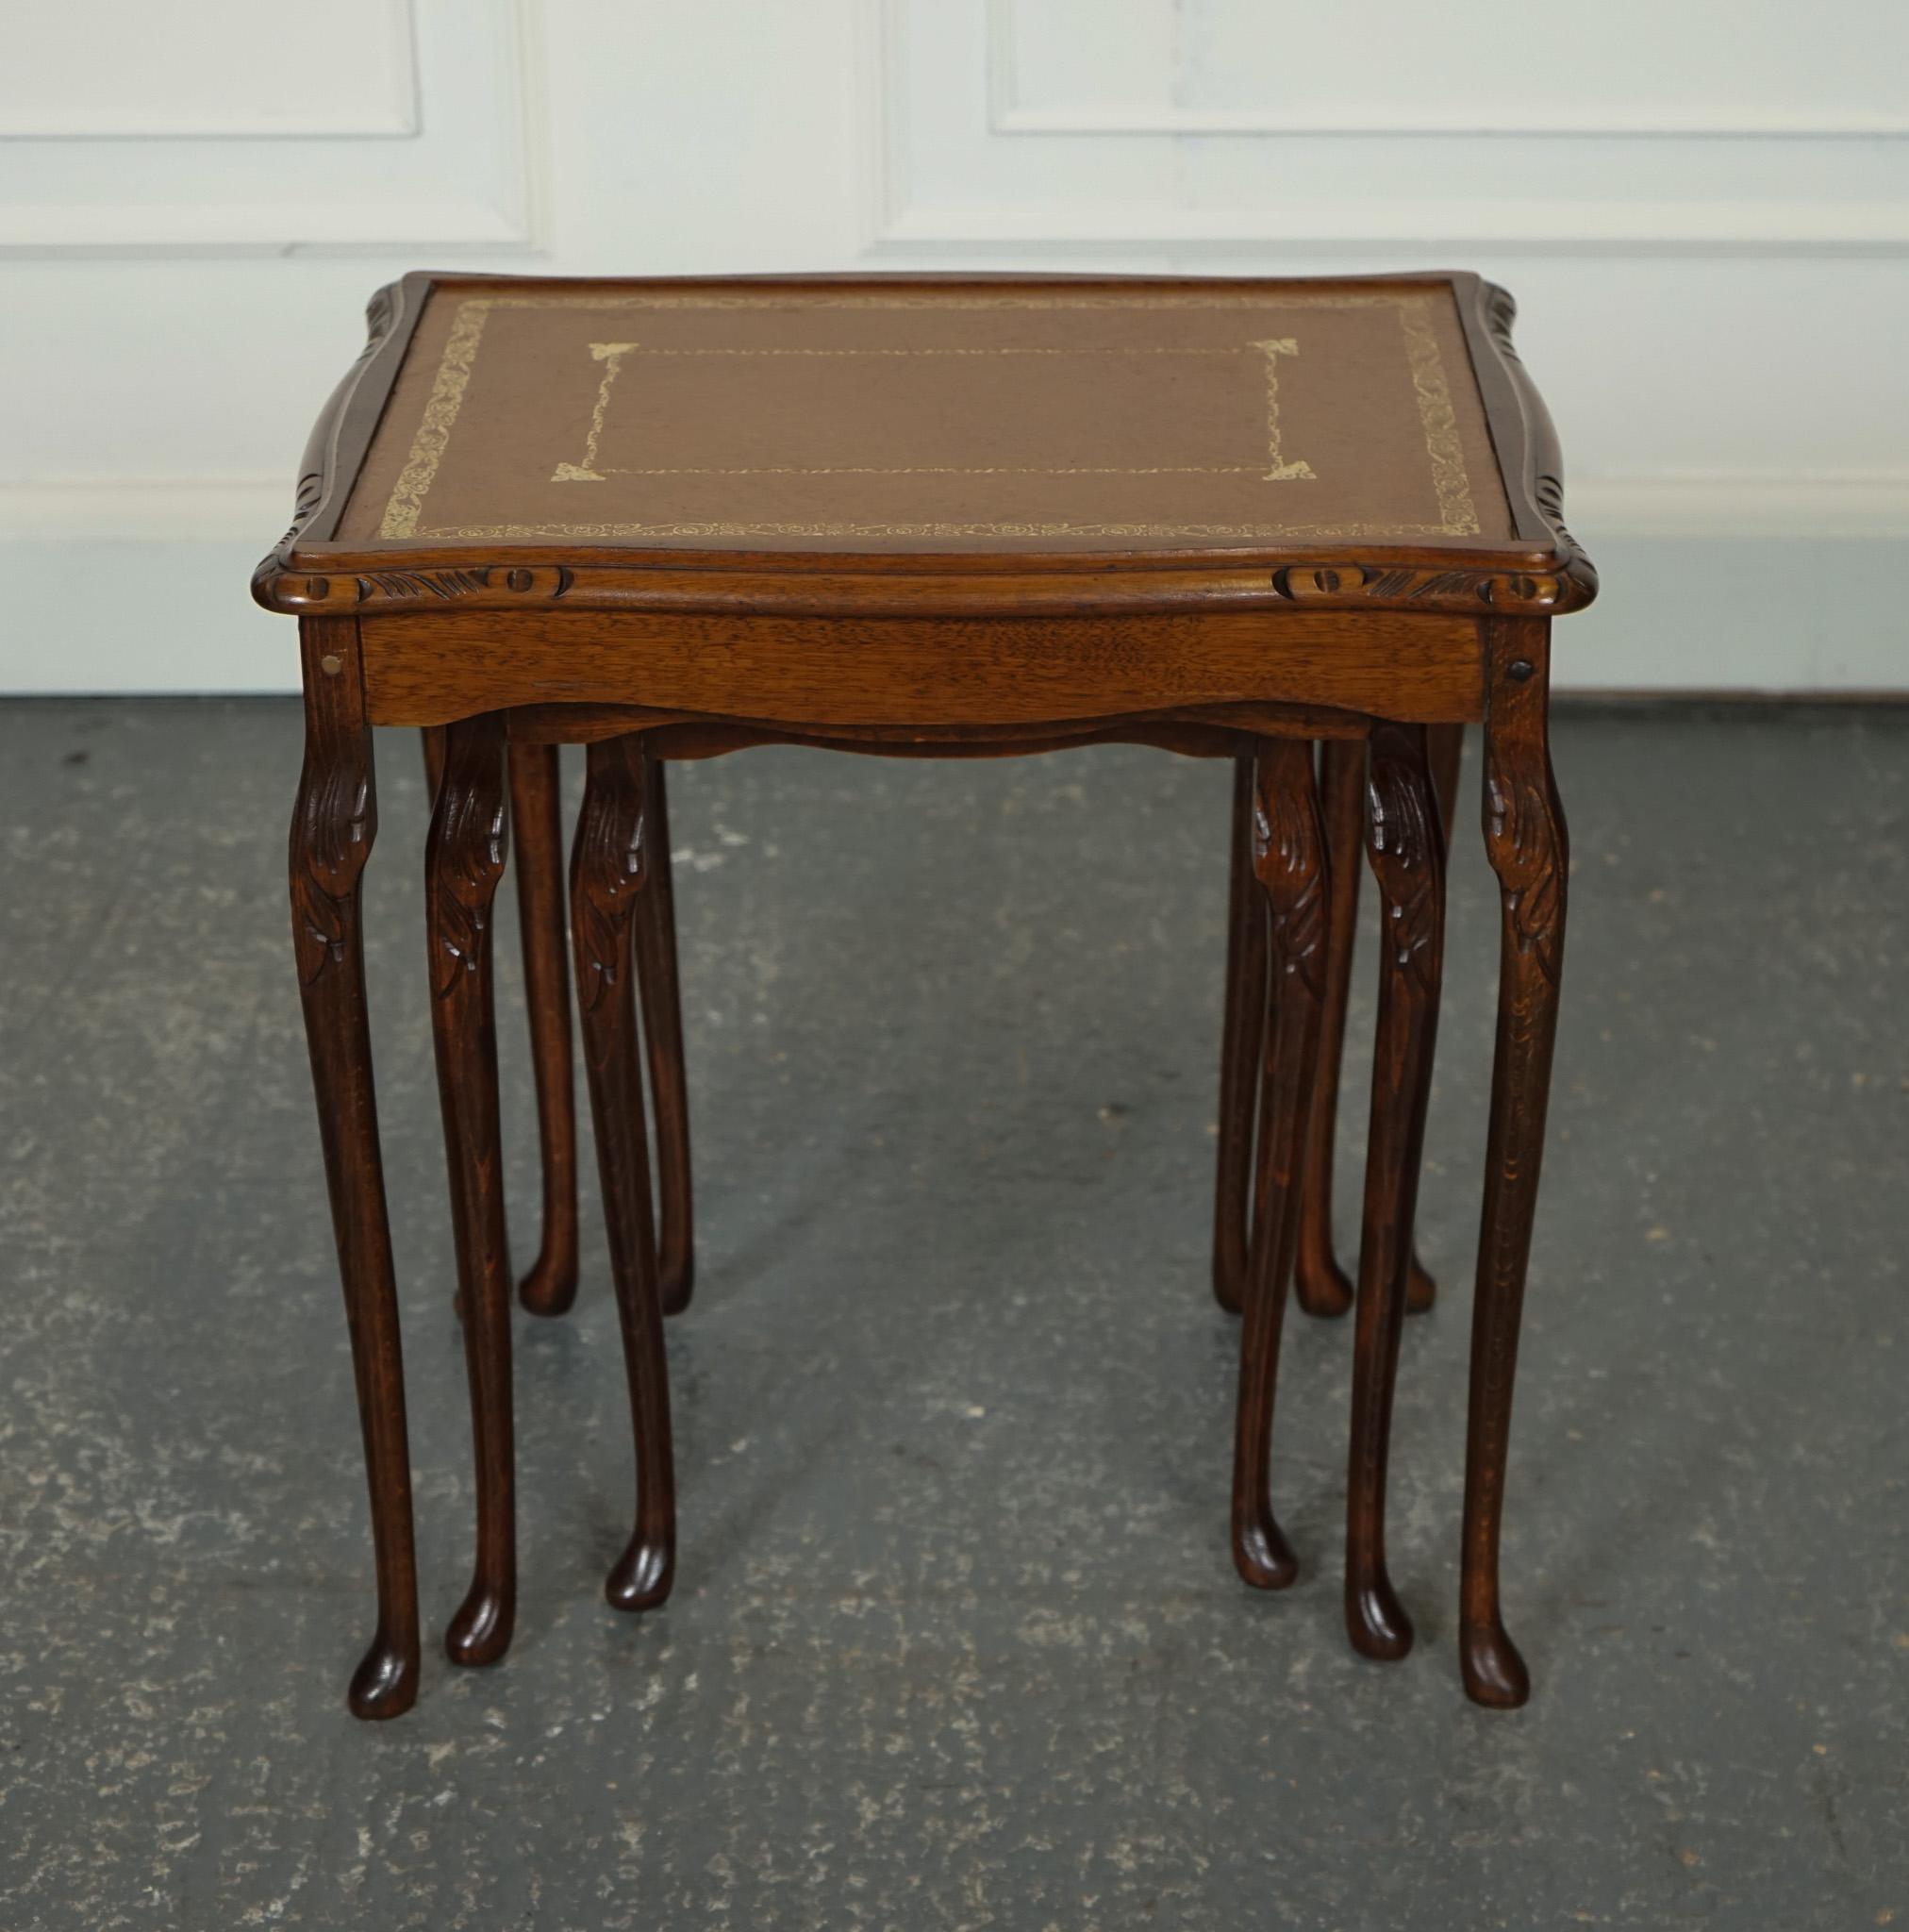 VINTAGE NEST OF TABLES QUEEN ANNE STYLE LEGS WiTH BROWN EMBOSSED LEATHER TOP J1 For Sale 1